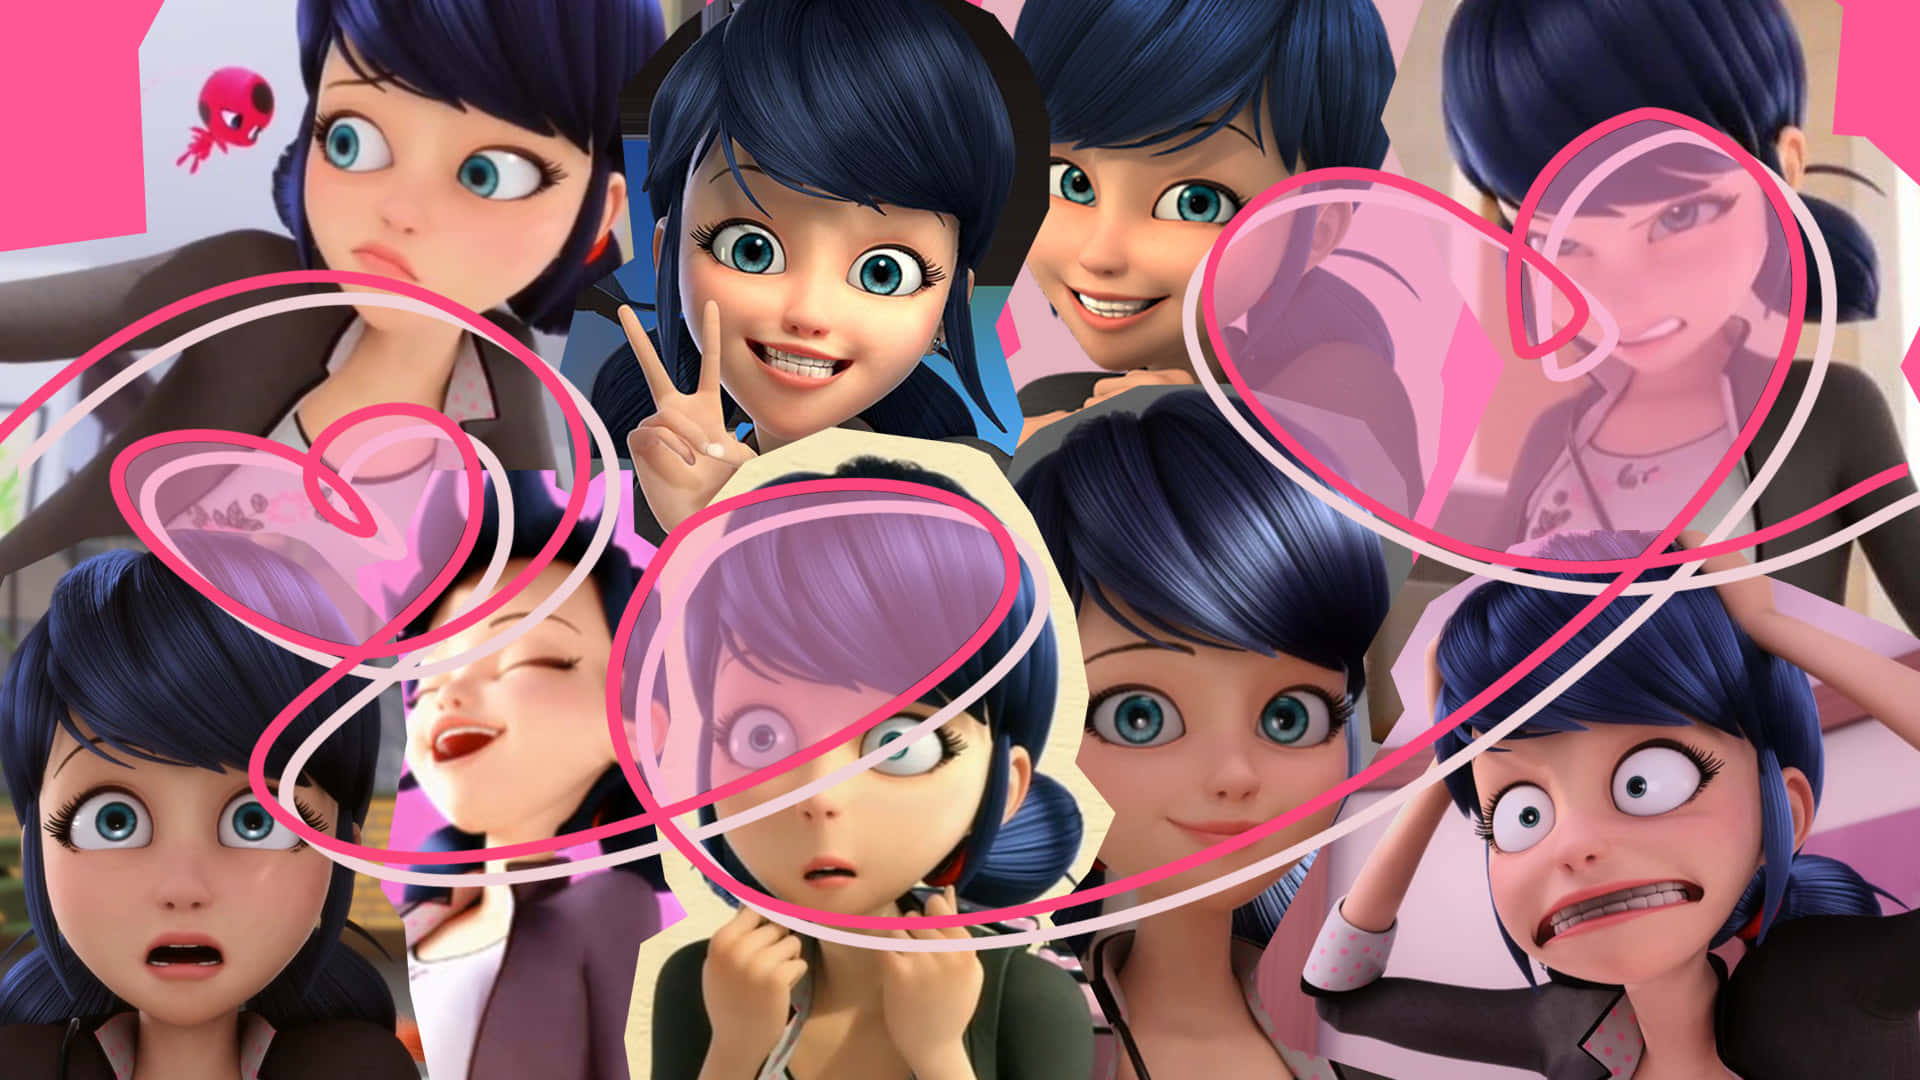 Marinette Dupain Cheng Expressions Collage Wallpaper